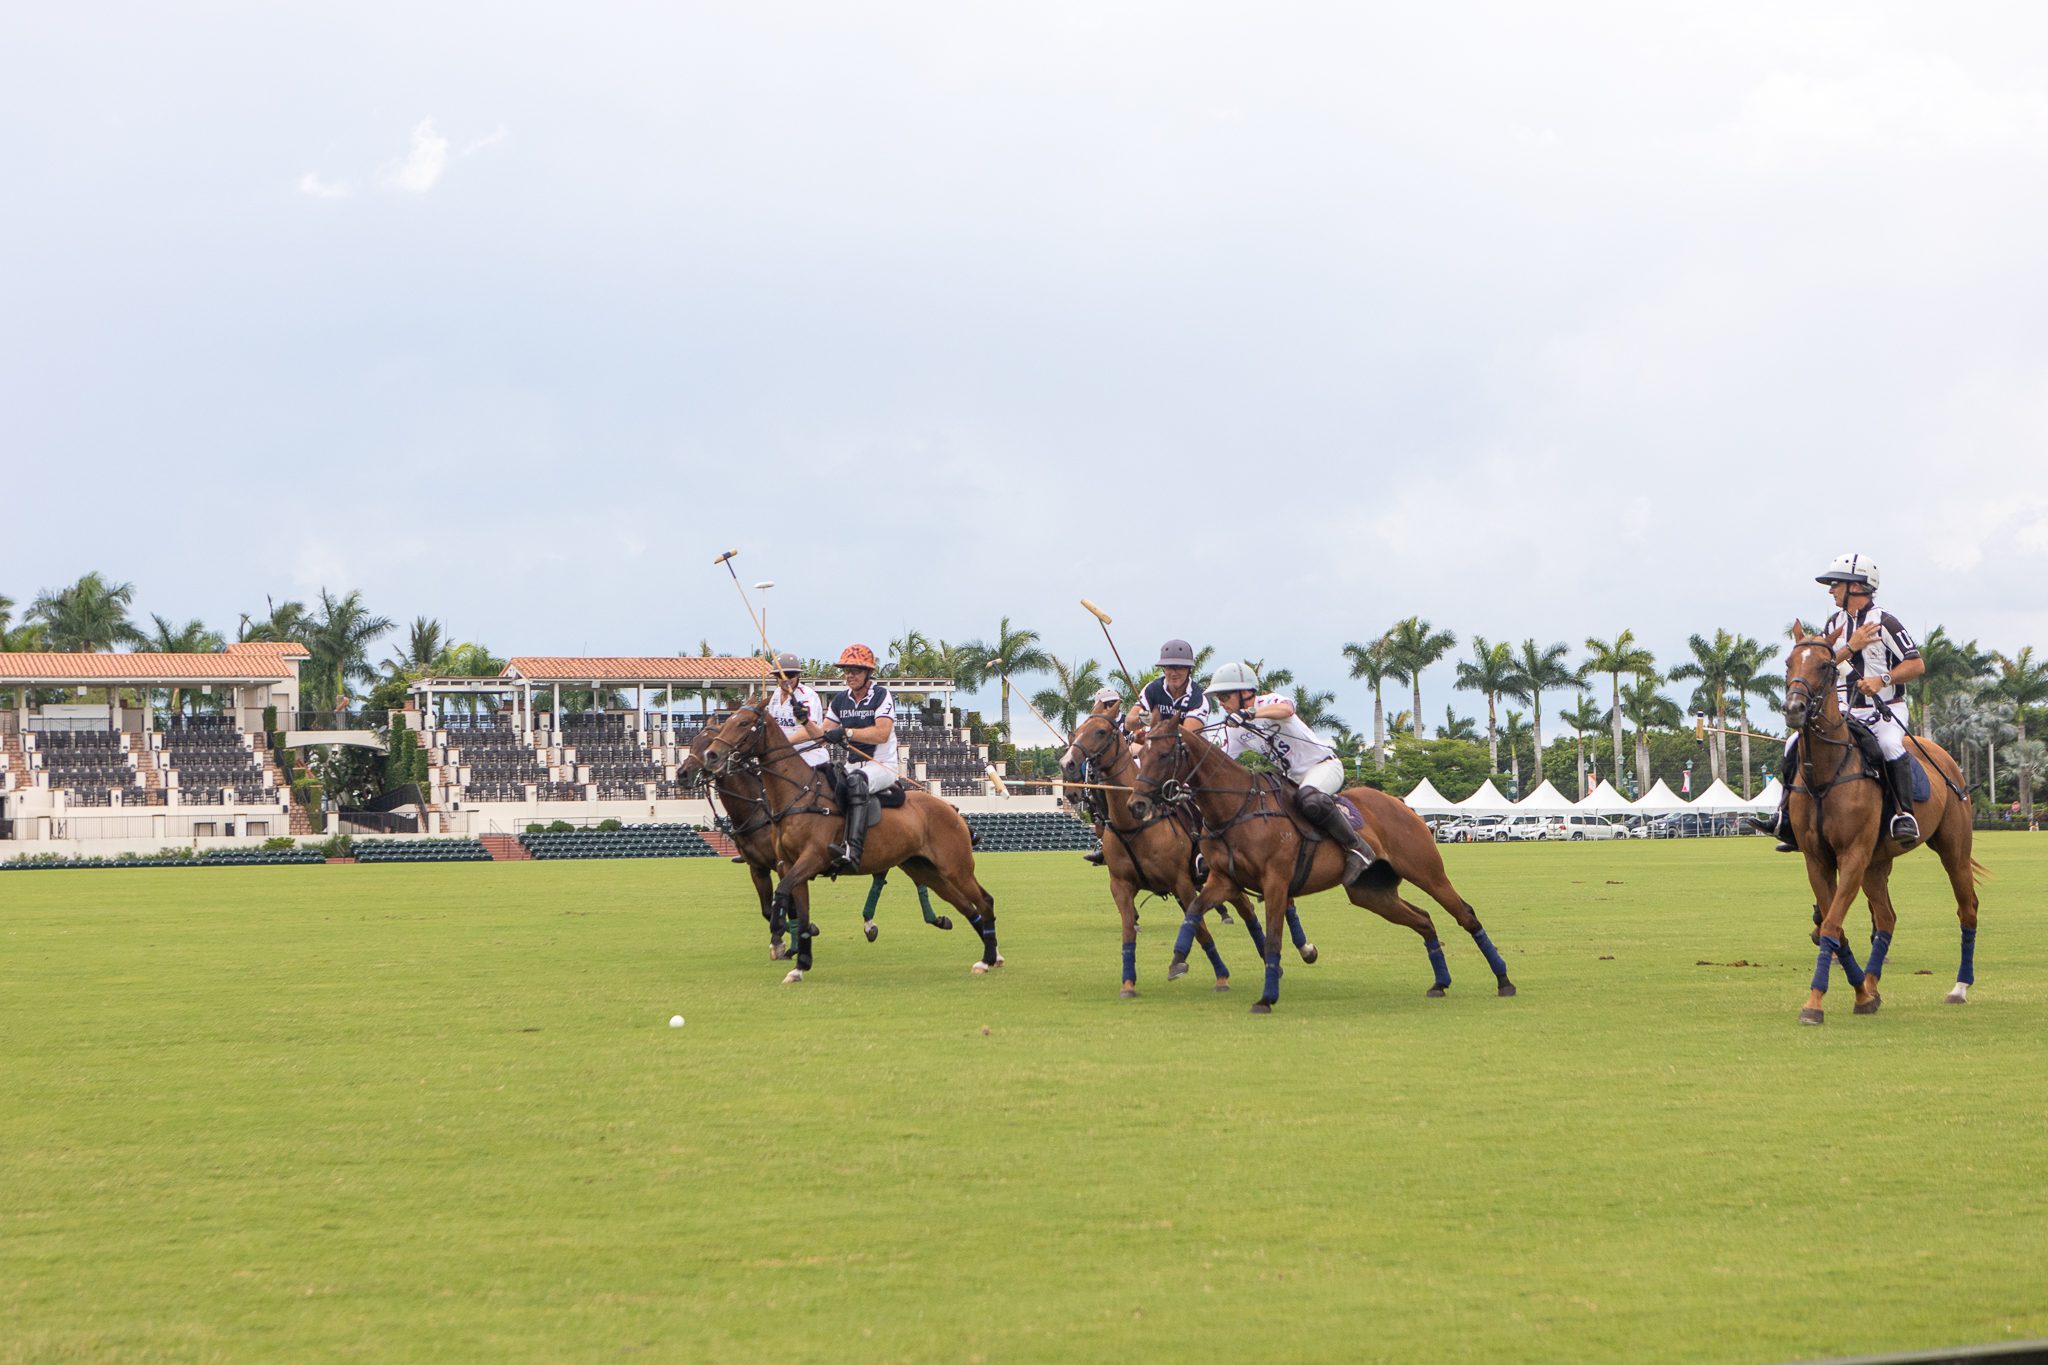 Polo demonstration at the Equestrian Legends event for The Buoniconti Fund in Wellington Florida